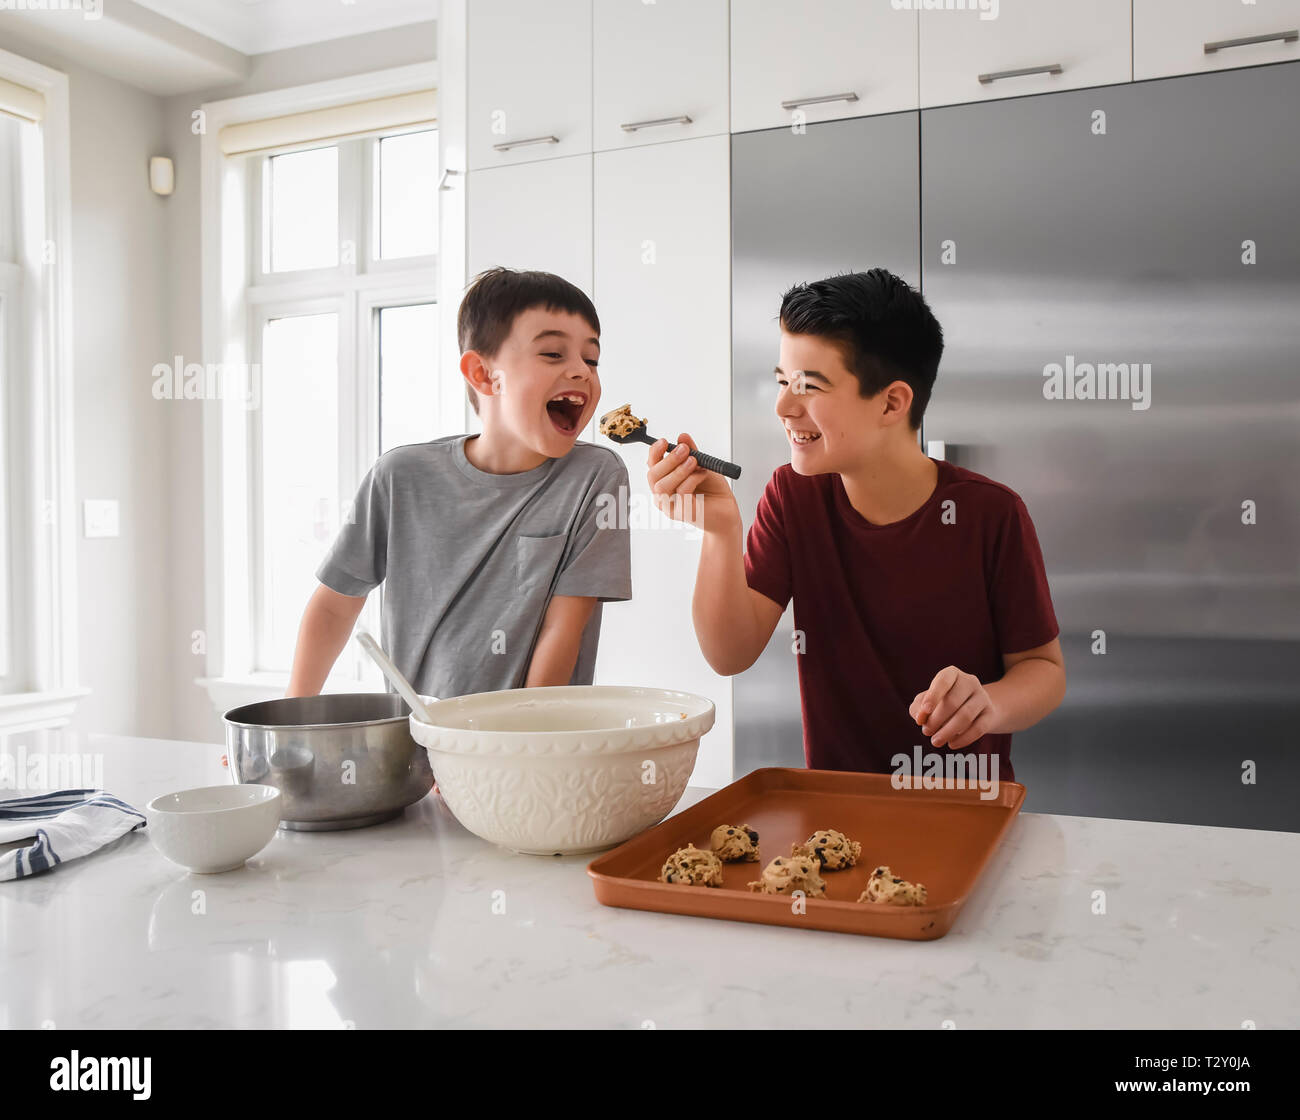 Older boy feeding cookie dough to young boy in modern kitchen Stock Photo